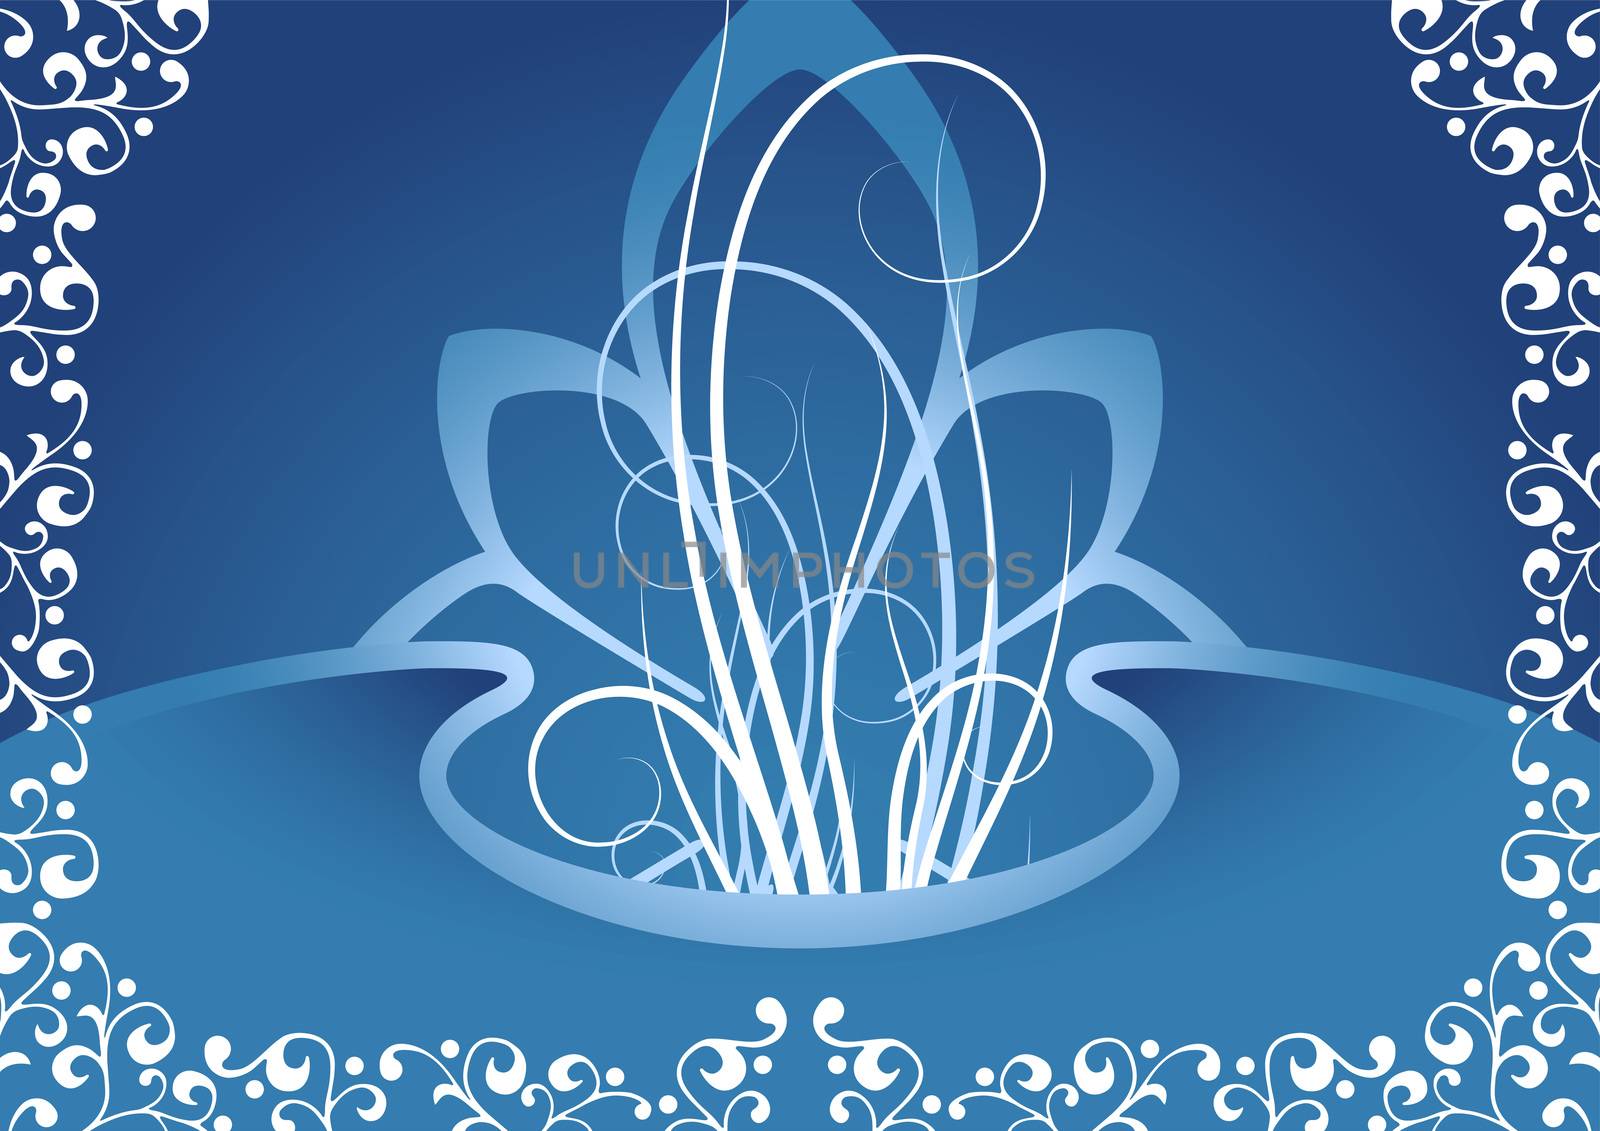 creative background with floral elements in blue color, vector illustration